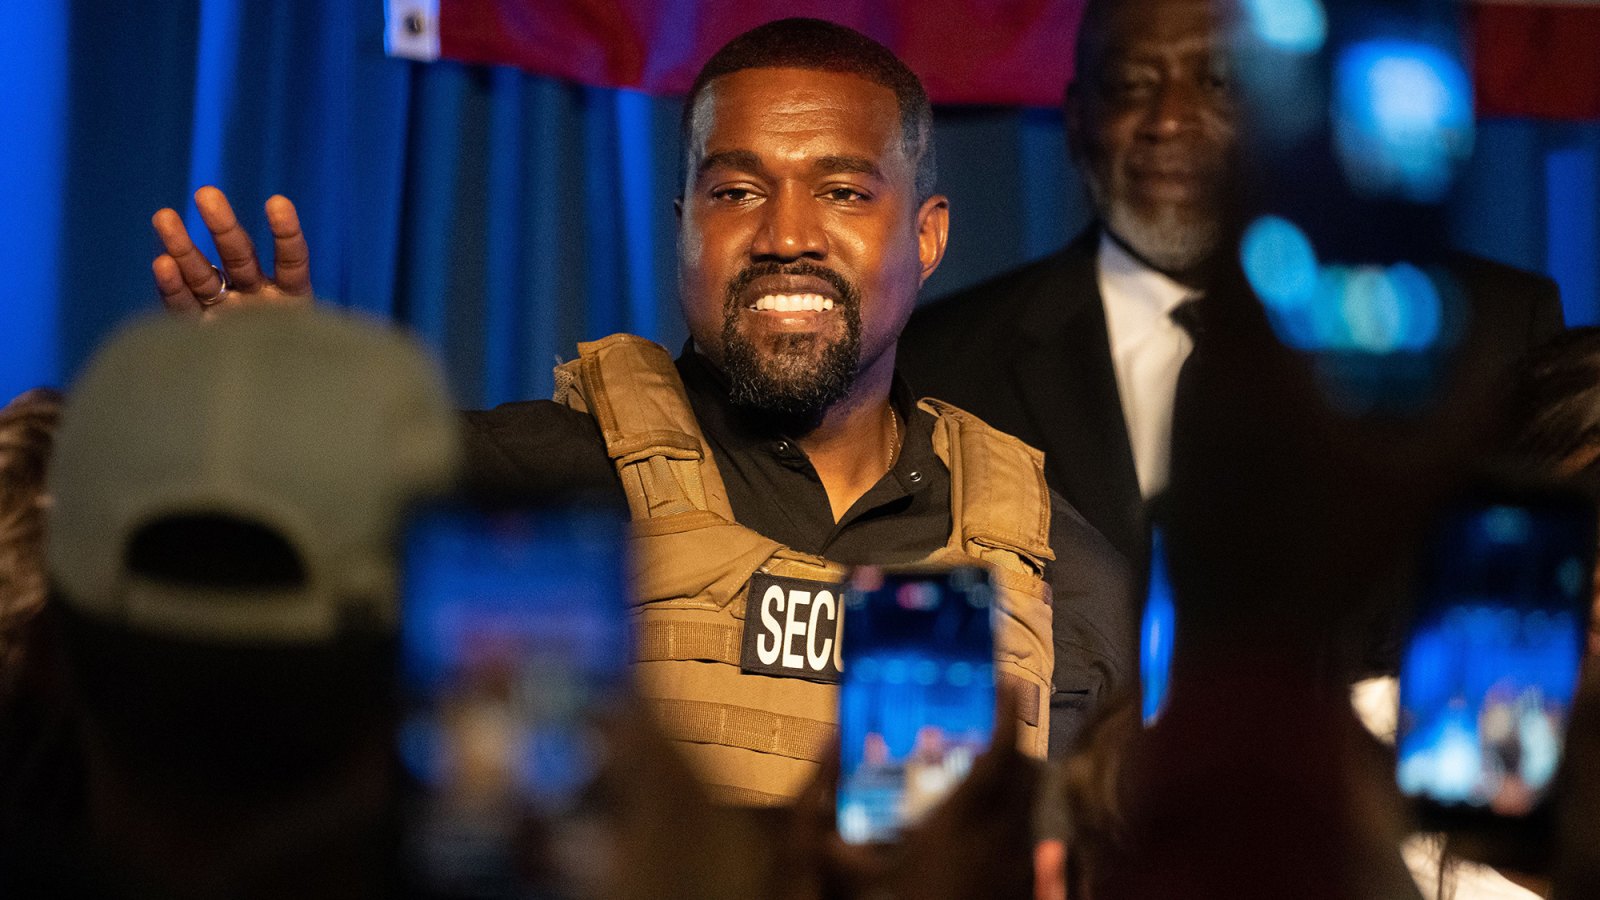 Kanye West Announces He's Running for President of the U.S. in 2024, Shares 1st Campaign Ads